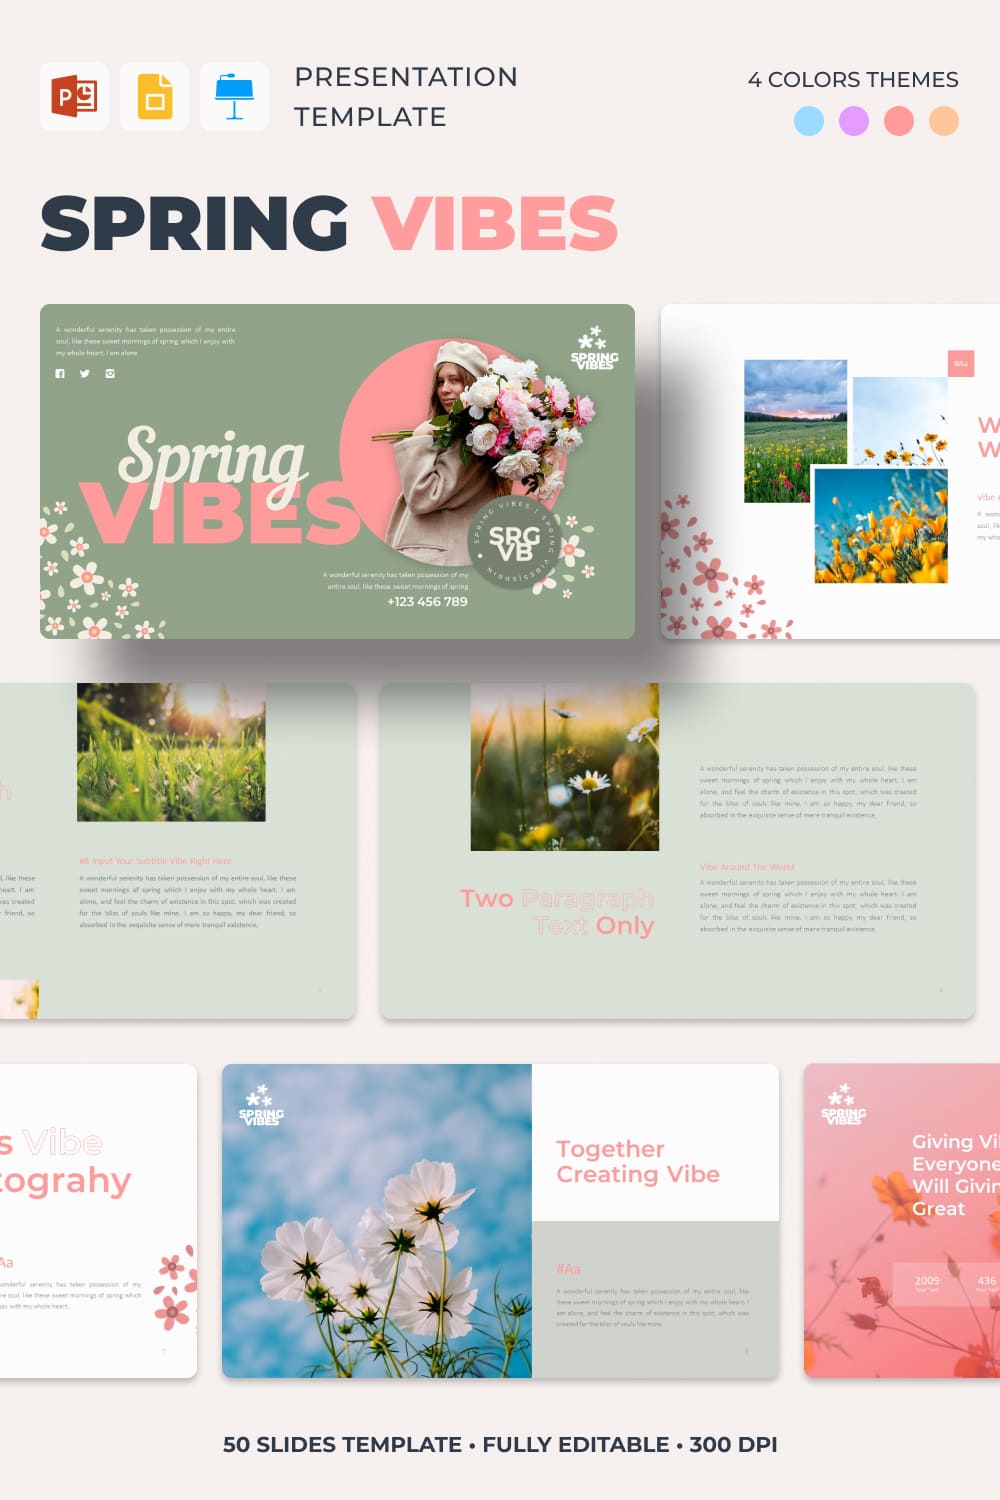 Spring Vibes Presentation Template - pinterest image preview.